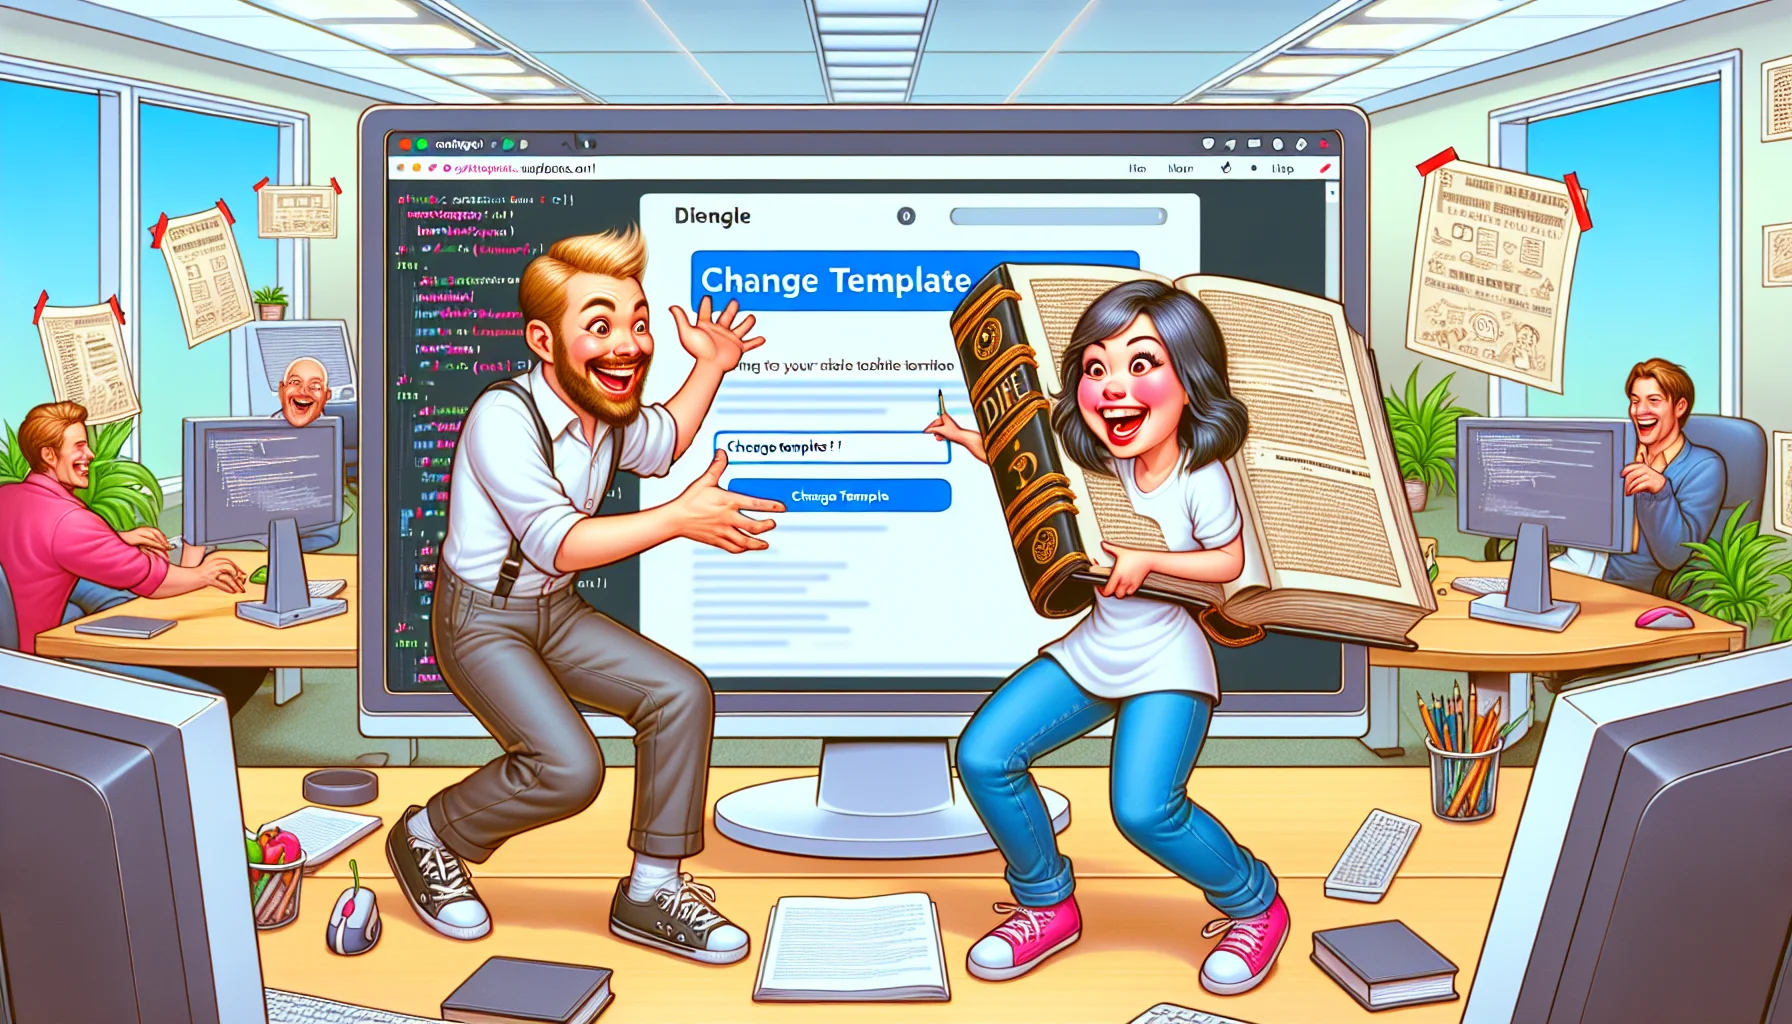 Create a whimsical and amusing image depicting a scenario where a cheerful Asian woman and a jovial Caucasian man, both web developers, are working together on a website template change on a fictitious web hosting platform similar to Squarespace. The two are in a bright, modern office filled with monitors and coding books. One is clicking an oversized 'change template' button on a screen while the other is holding a huge illustrated book titled 'website template guide', both laughing and pointing at the screen.